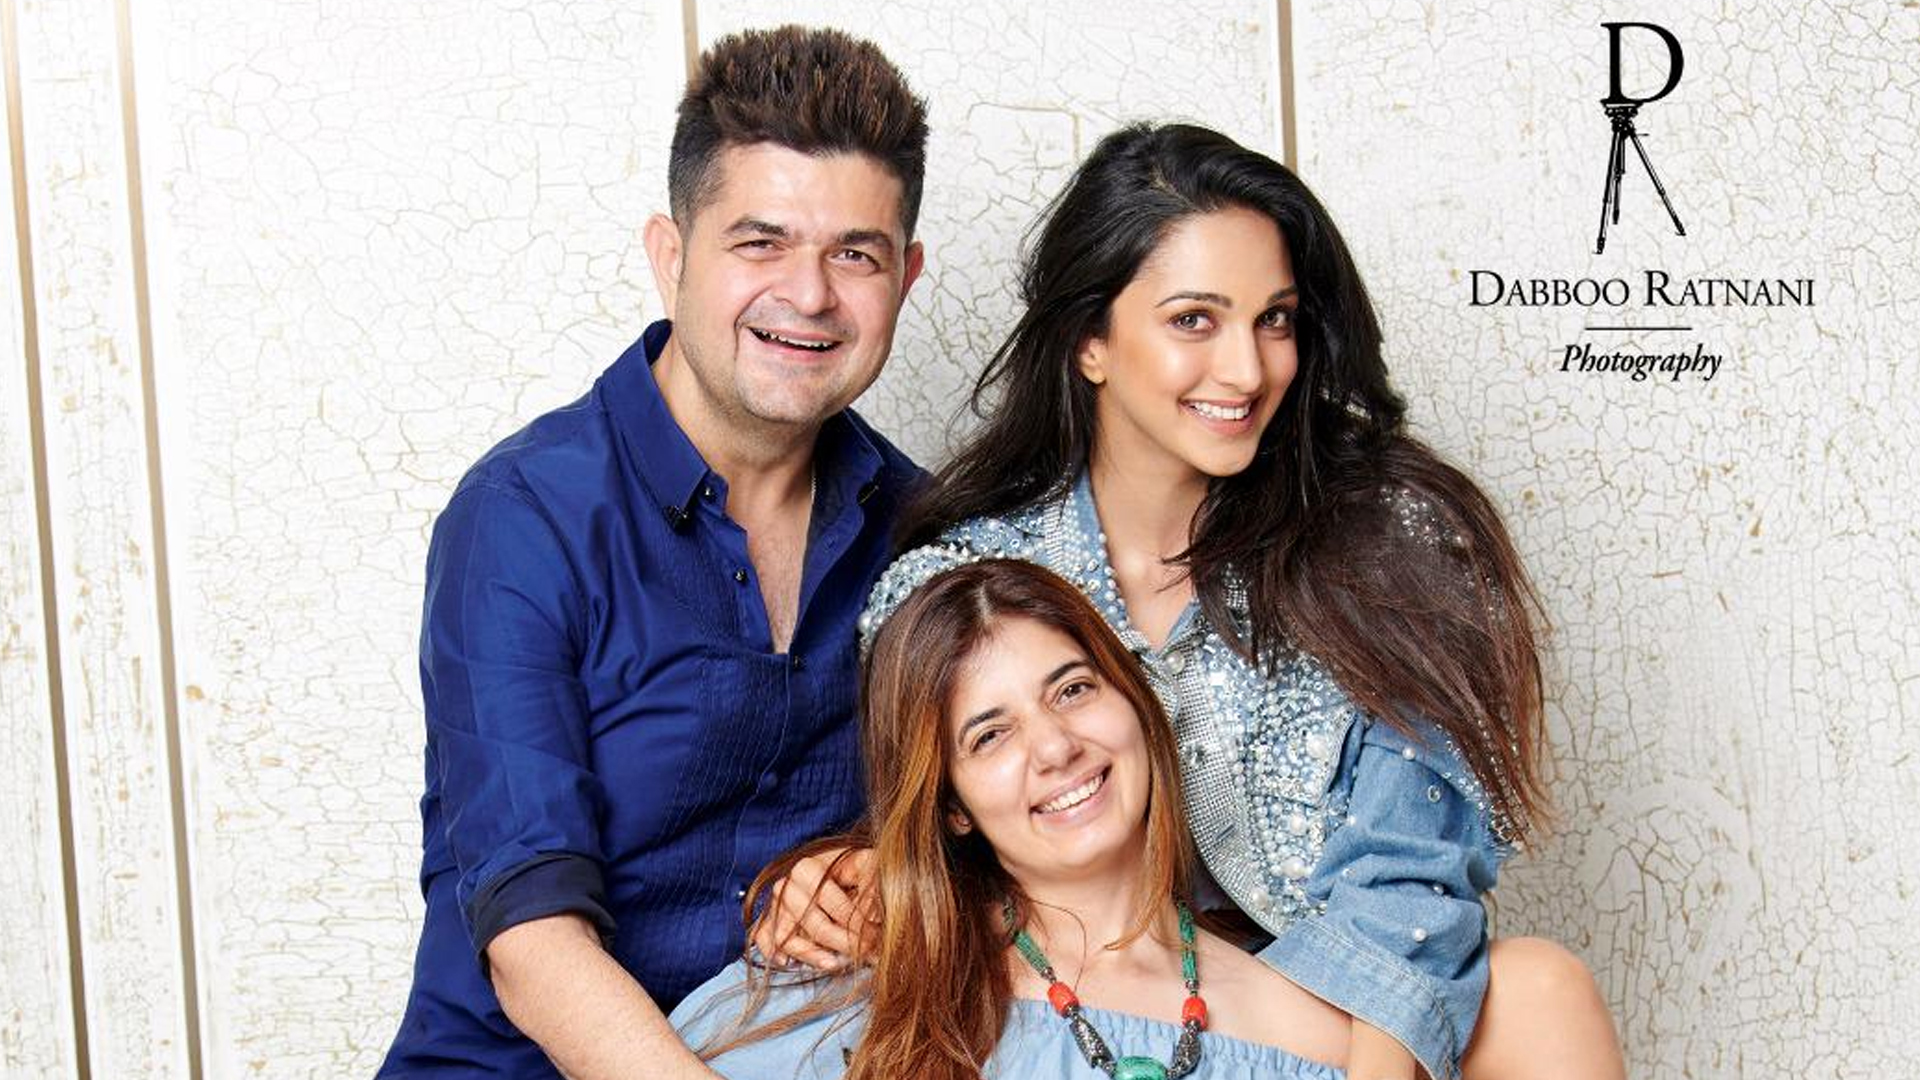 Kiara Advani makes yet another debut with Dabboo Ratnani; shoots for his calendar for the first time